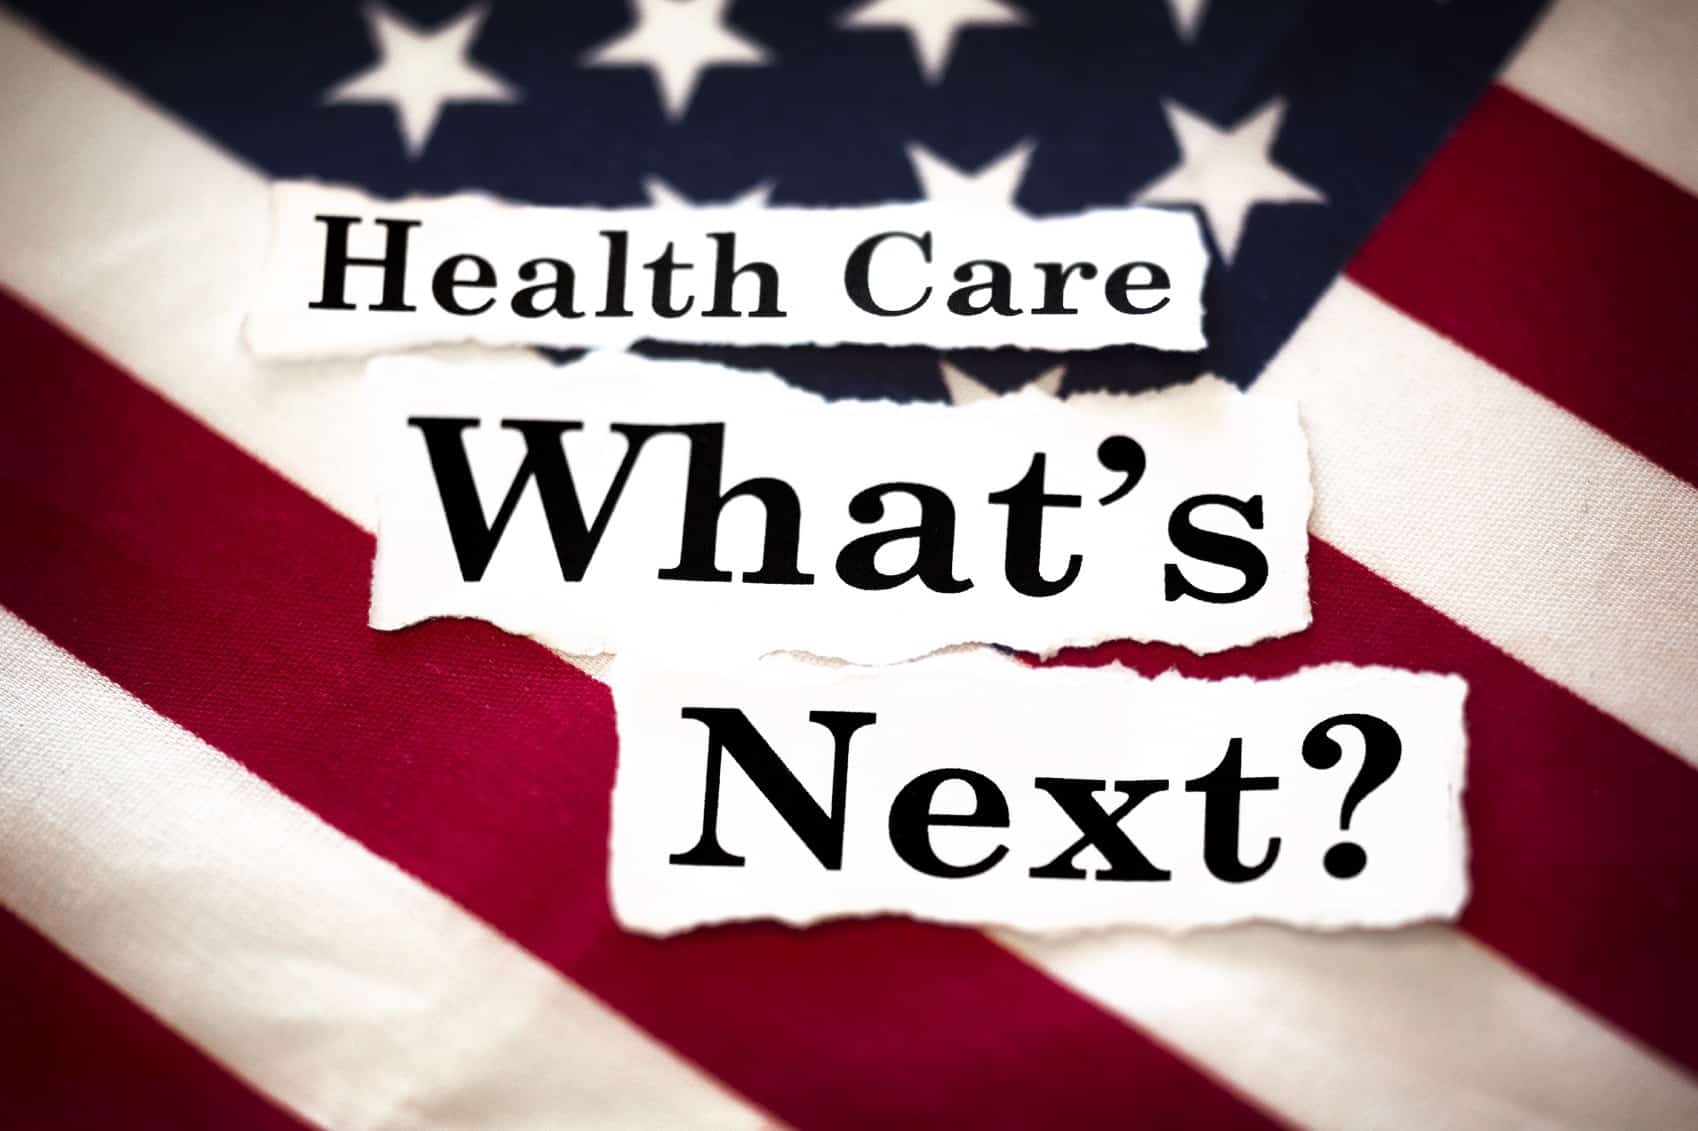 How the Affordable Care Act may affect patient care